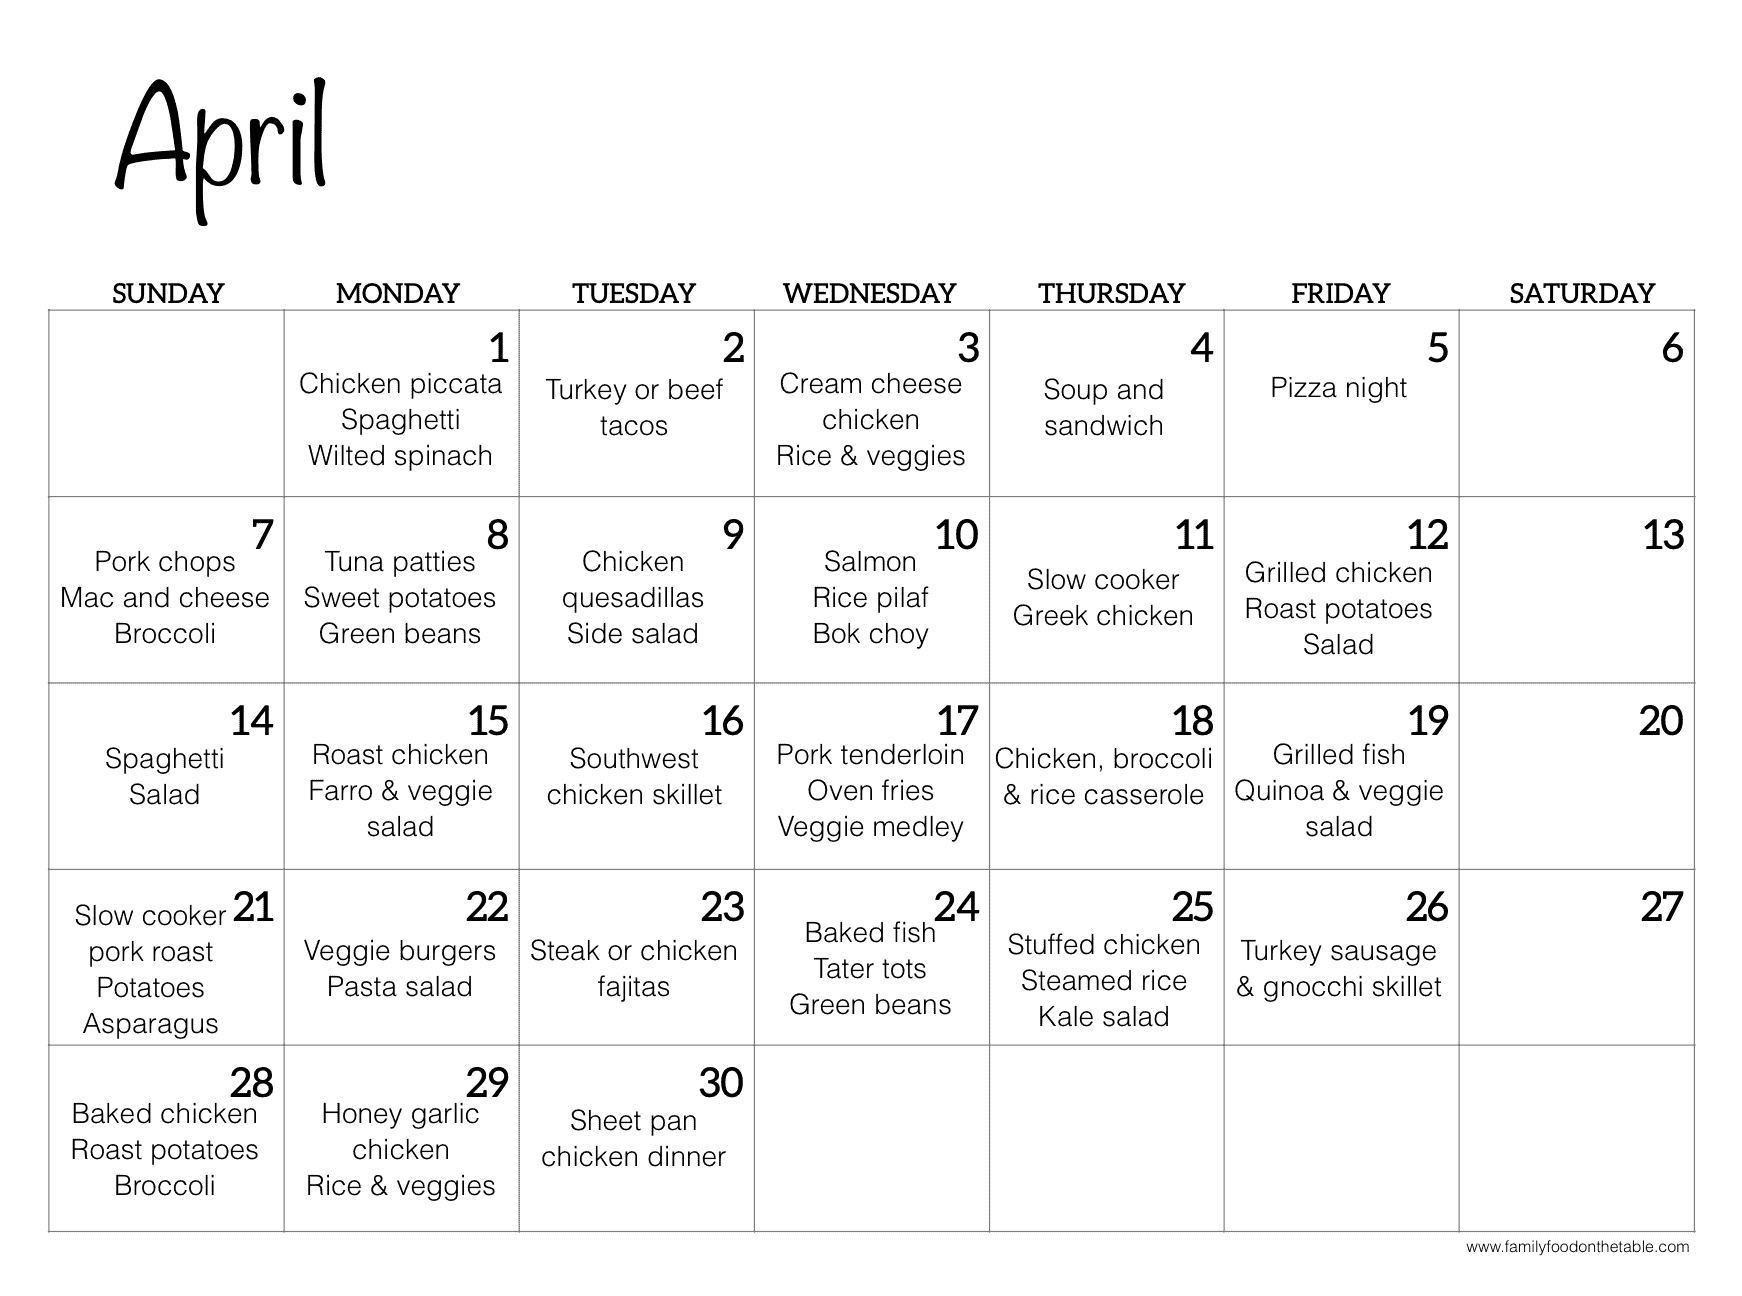 April 2024 calendar with dinner ideas entered in for each night of the week.